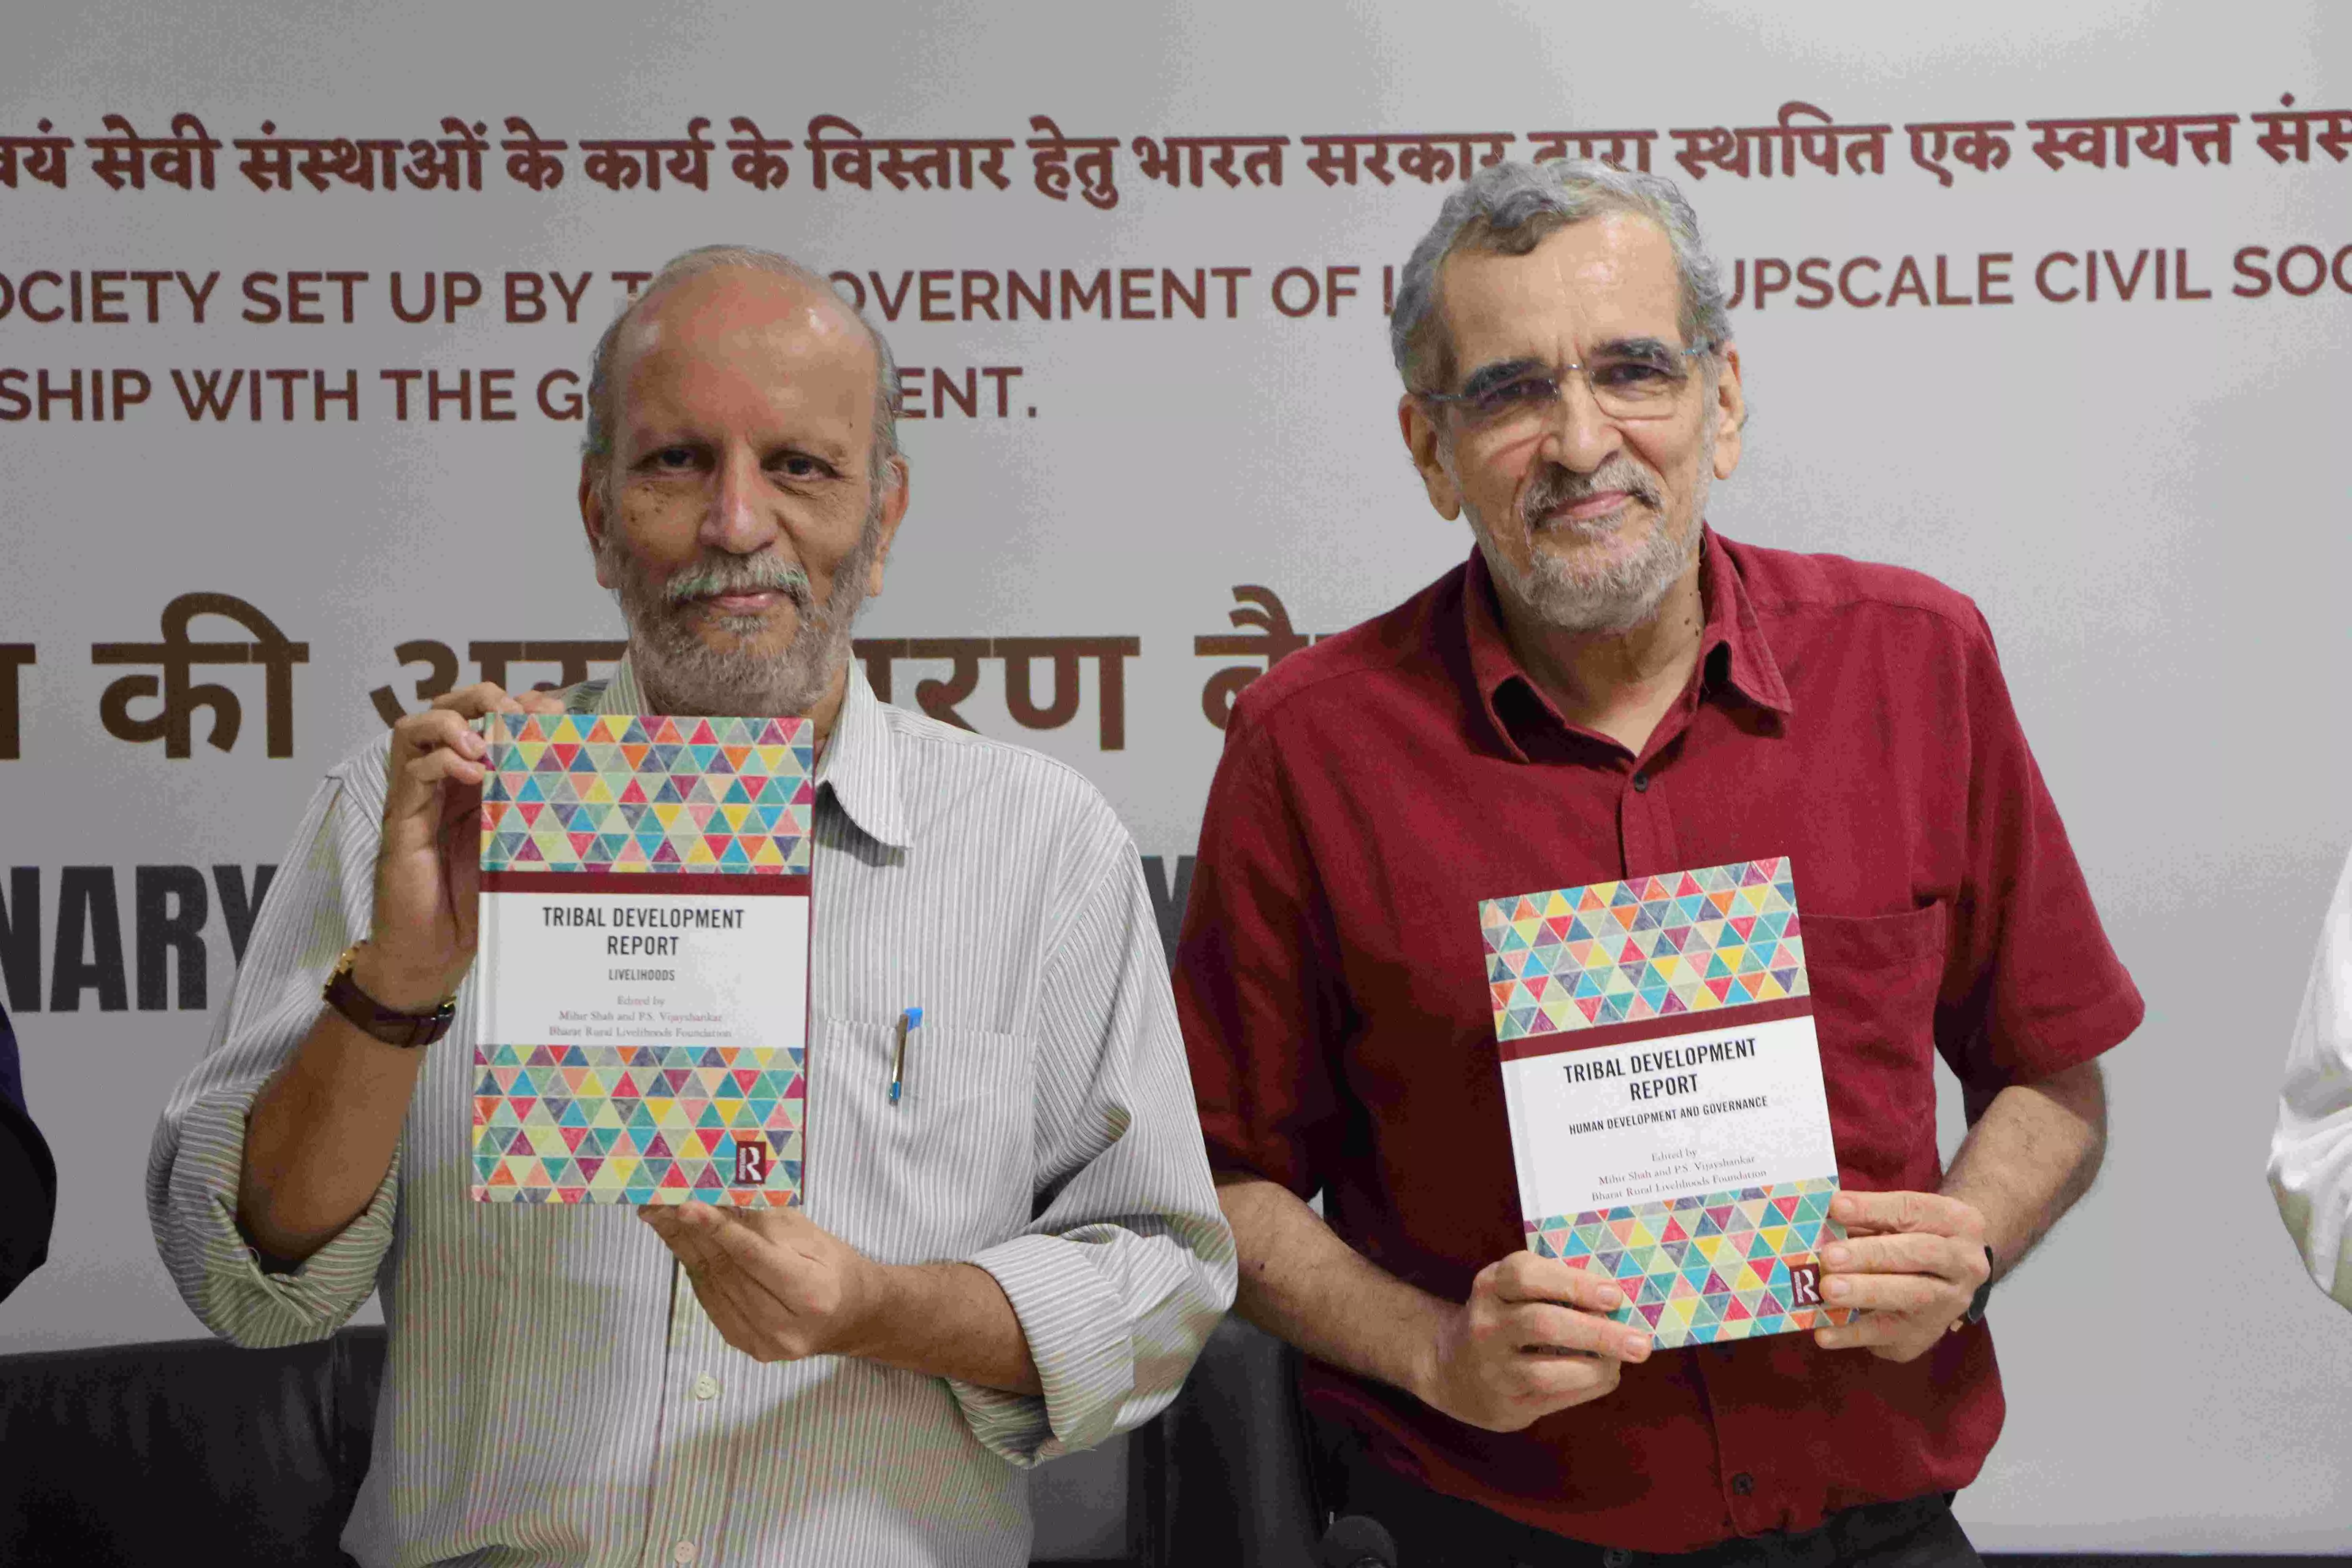 BRLF releases the first Tribal Development Report on the Adivasi communities of central India